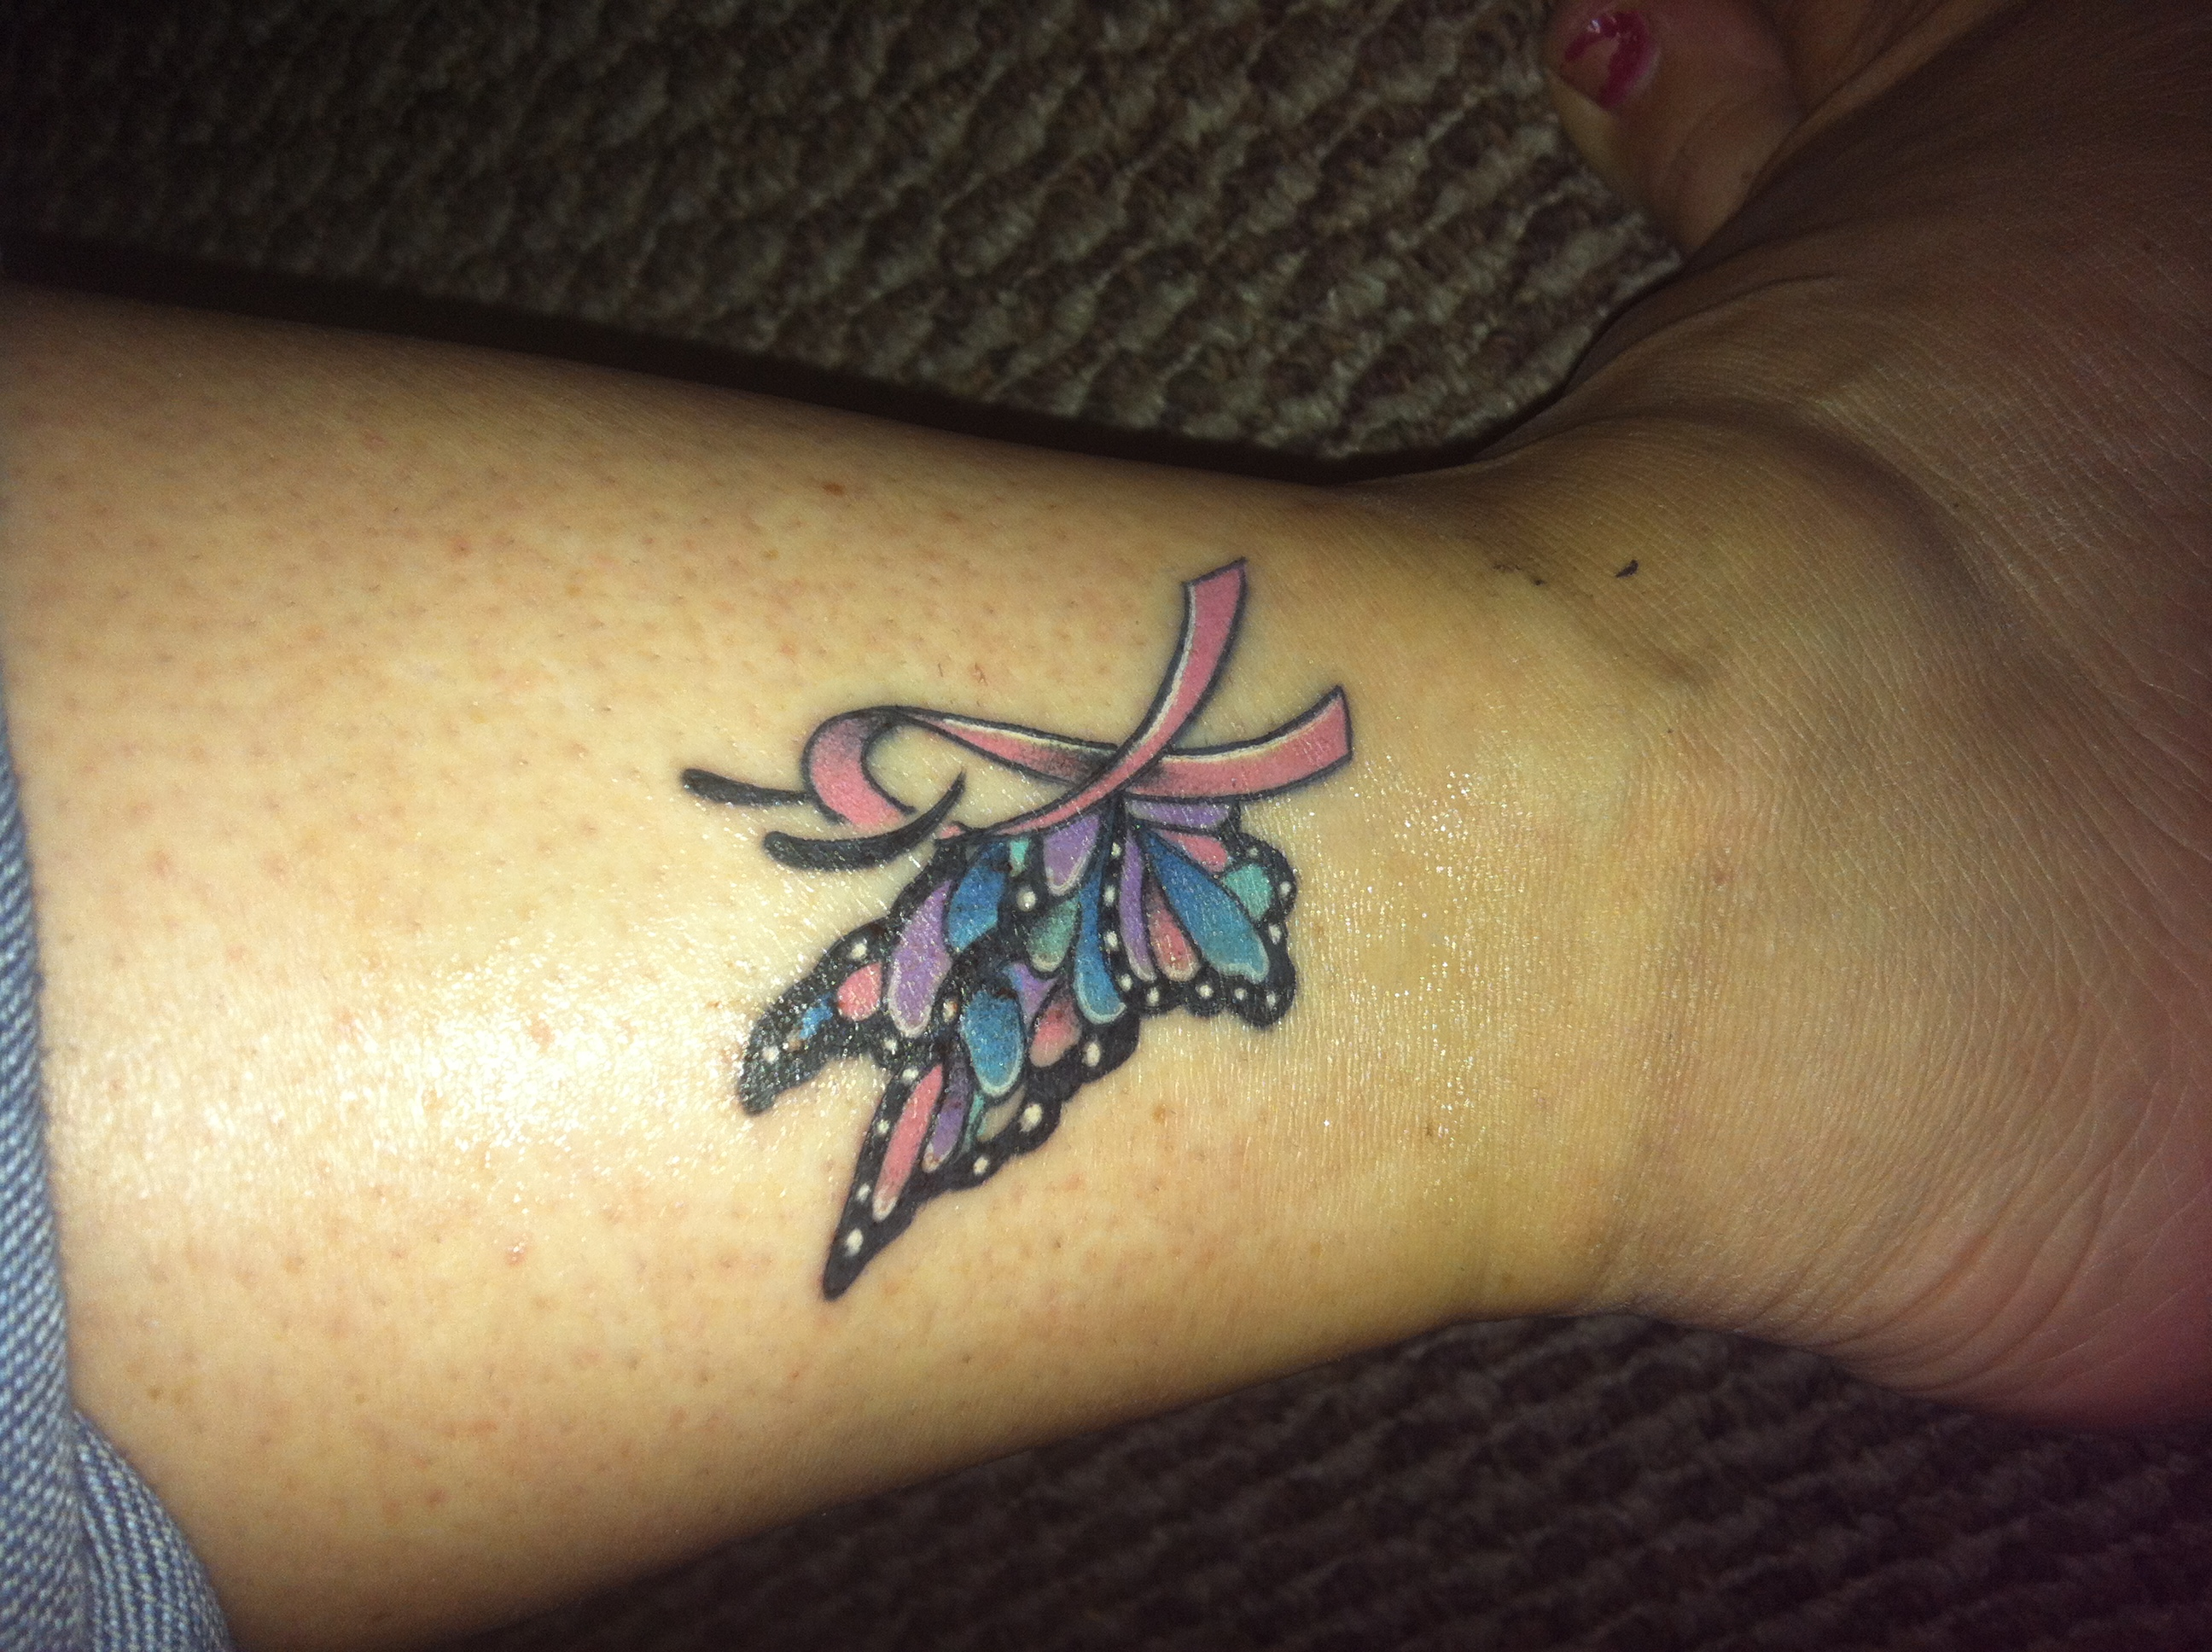 3. Butterfly Wings Breast Cancer Tattoo - wide 6